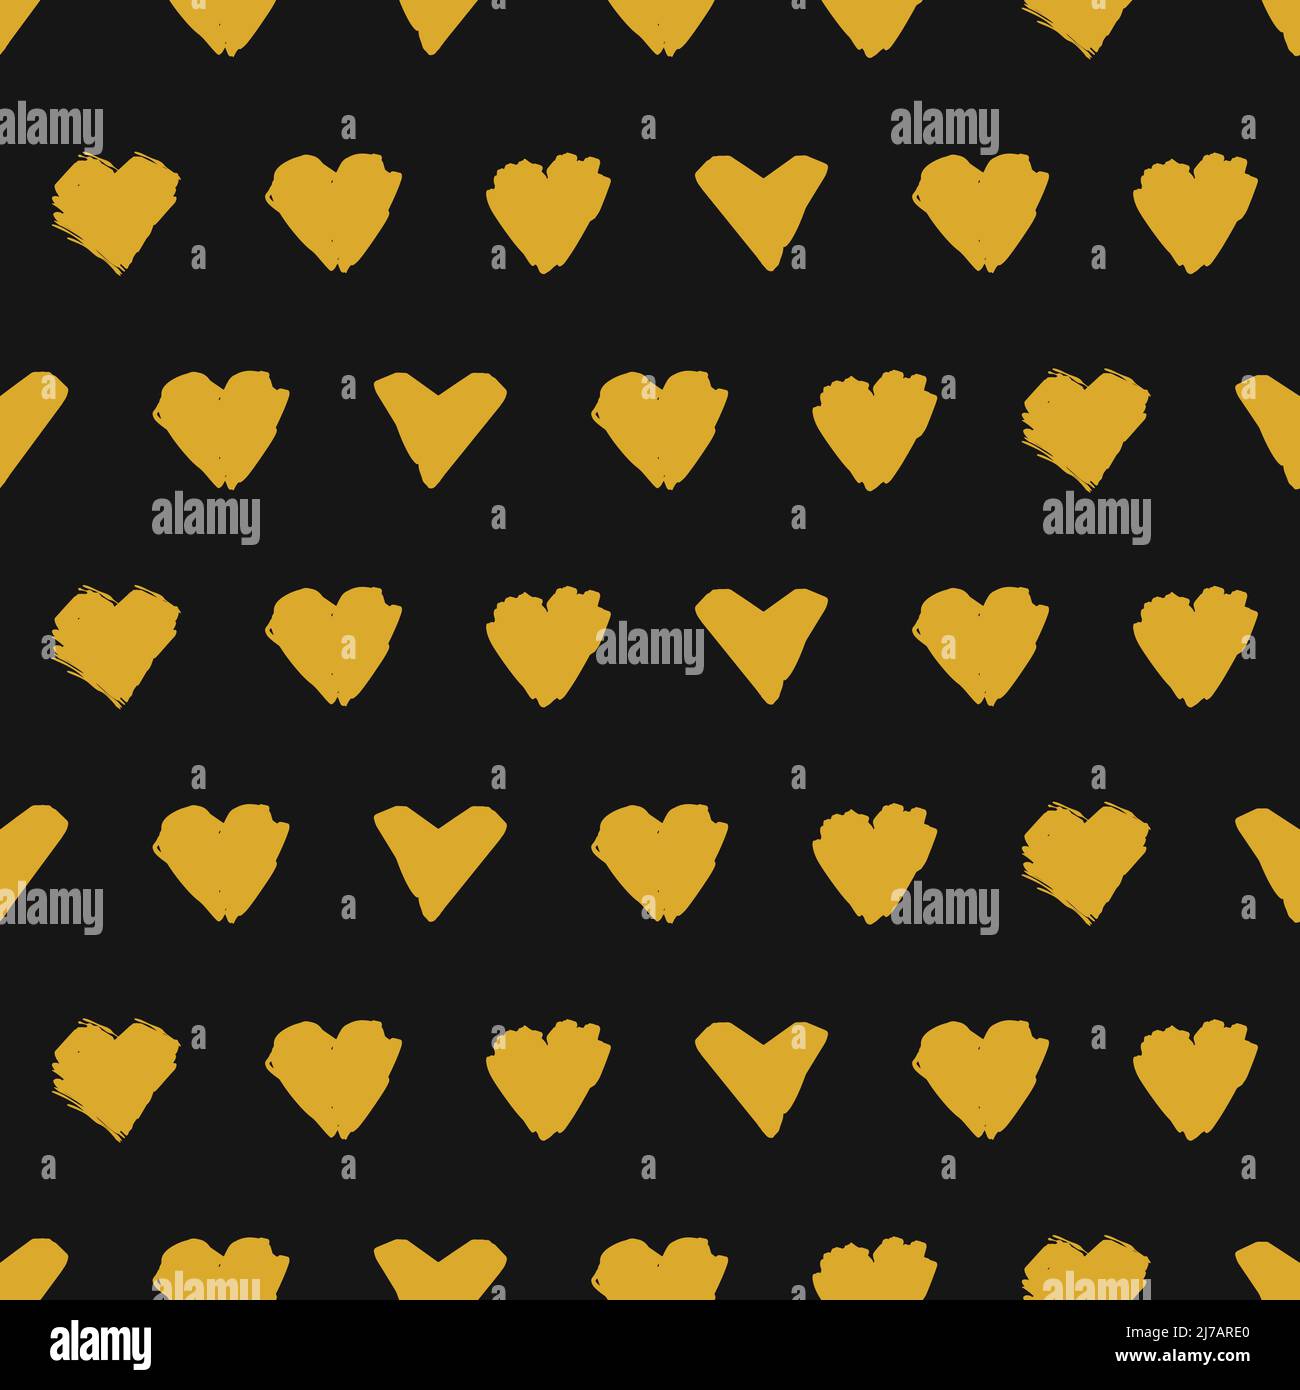 Hand drawn yellow hearts seamless pattern. Multiple painted heart icons vector illustration. Stock Vector